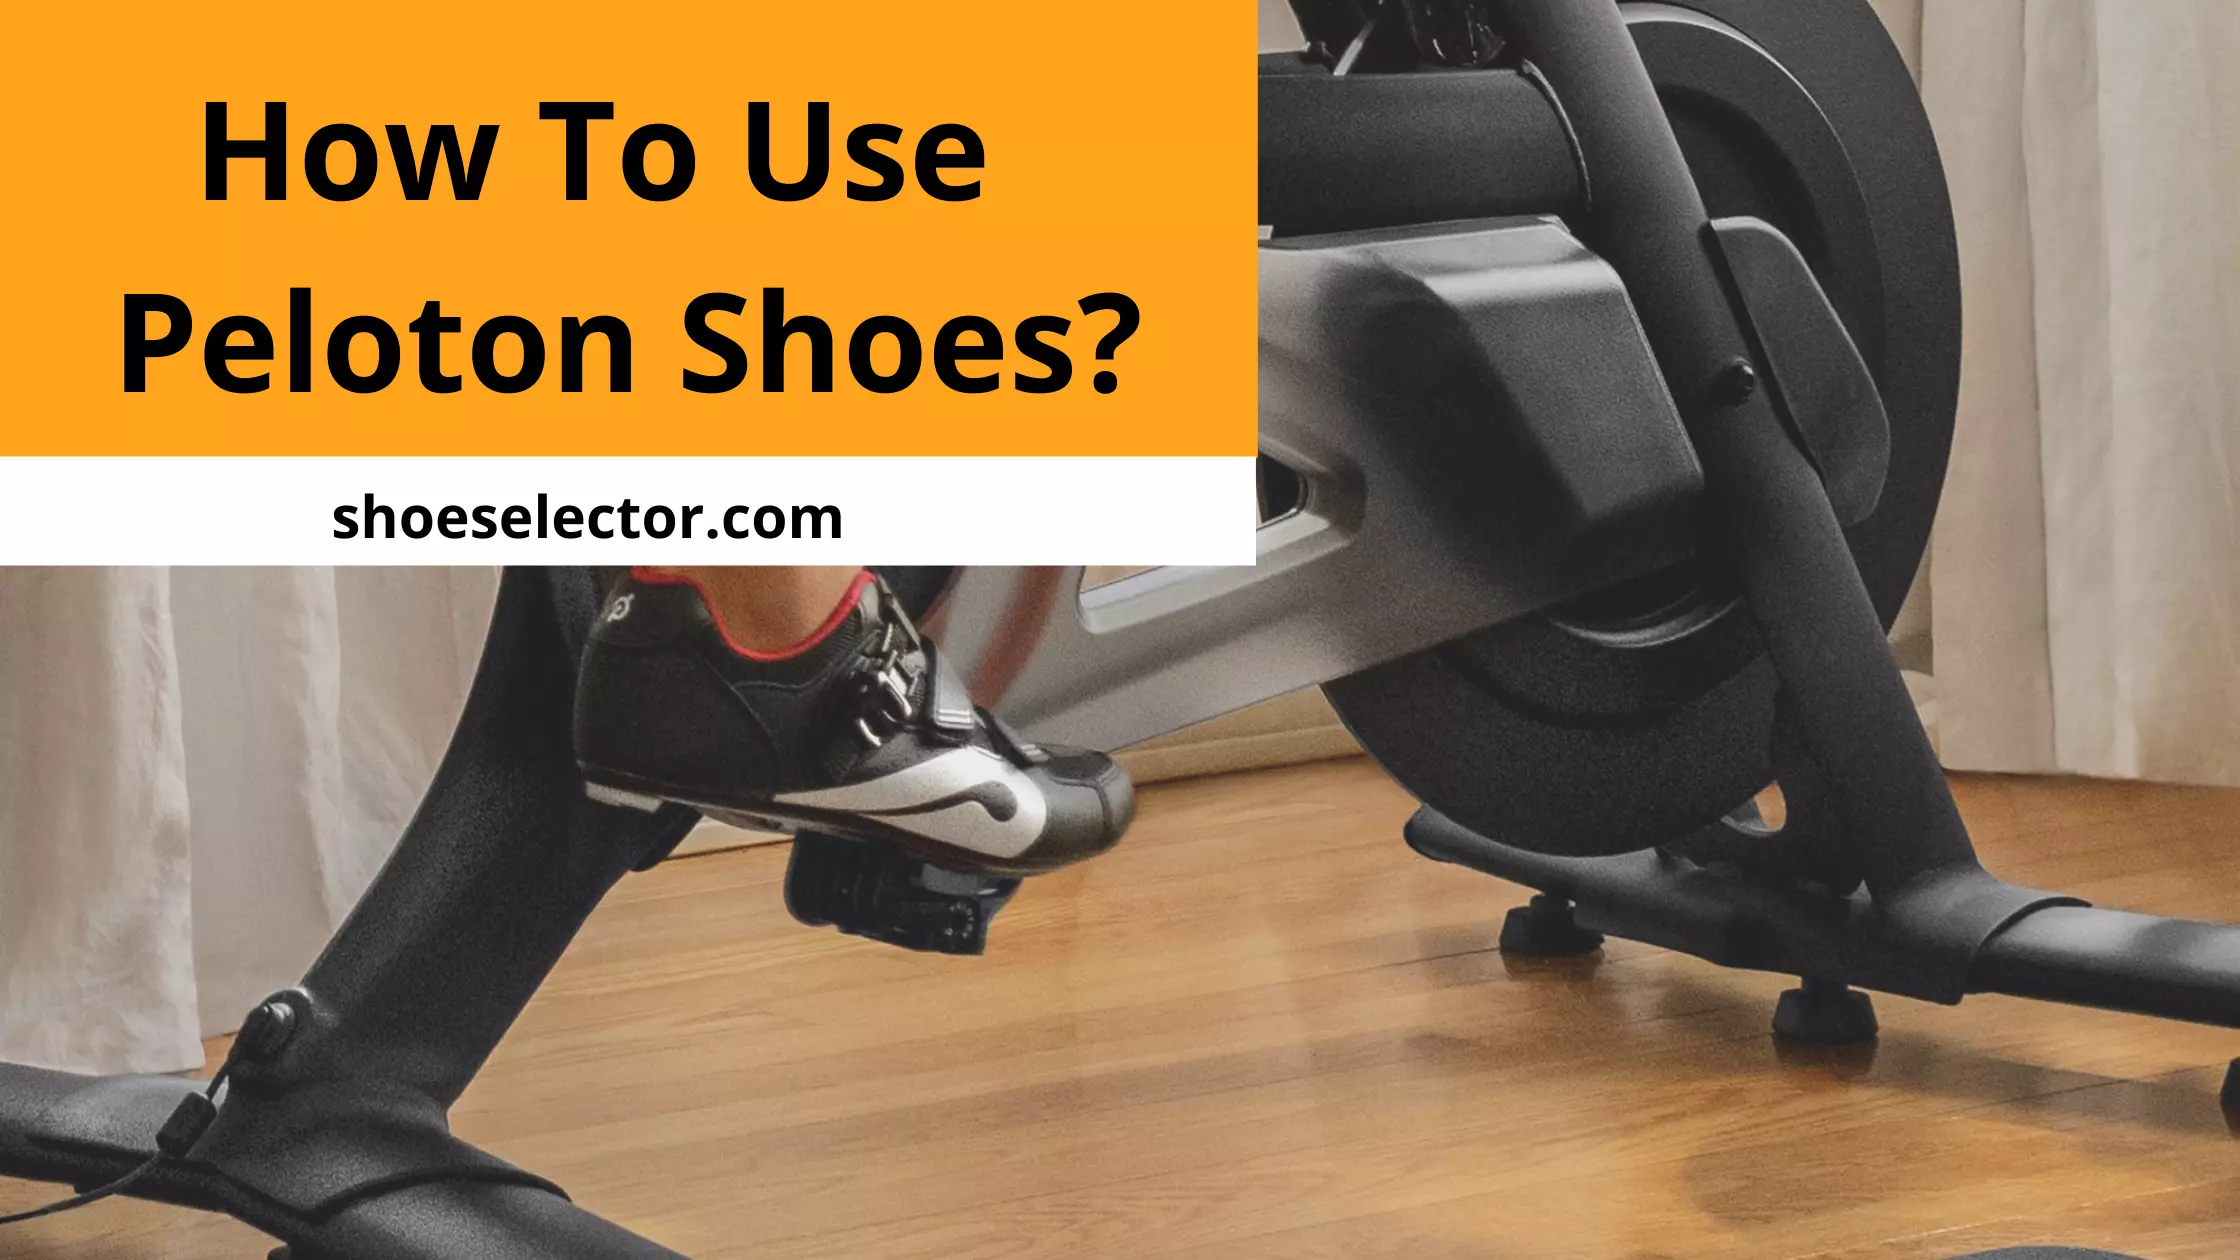 How To Use Peloton Shoes? - Solution Guide